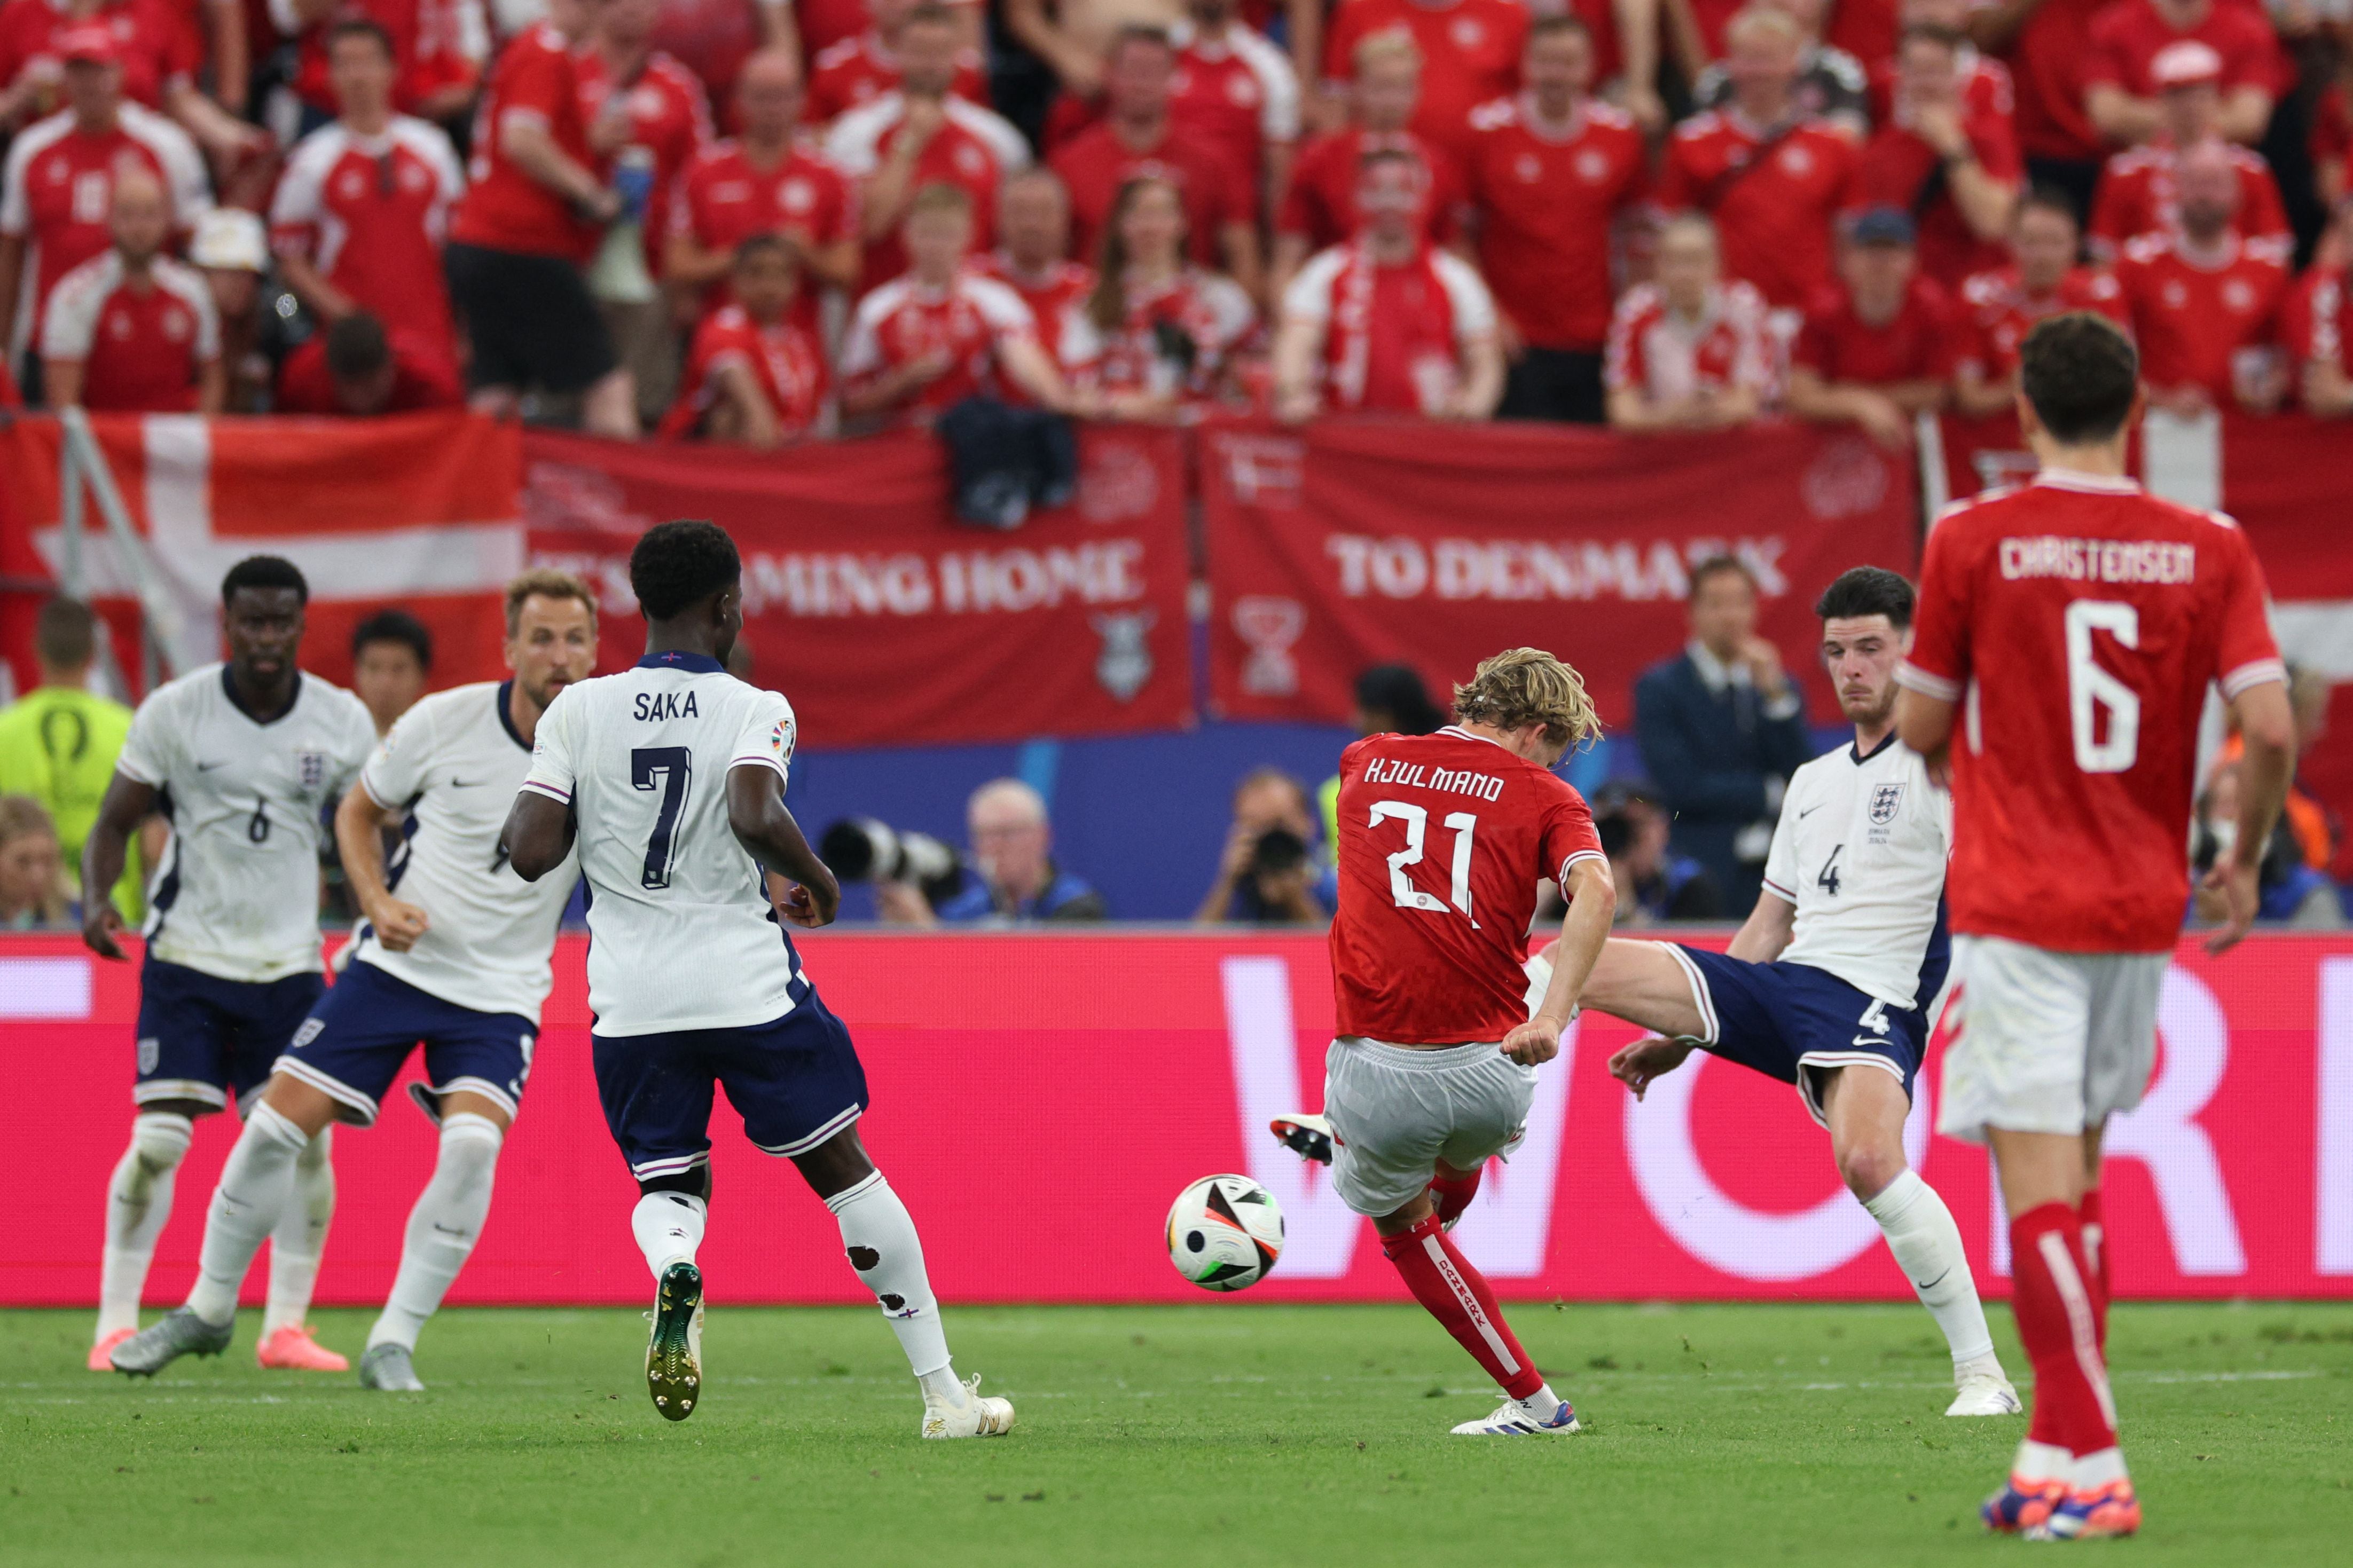 Denmark's midfielder #21 Morten Hjulmand scores his team's first goal during the UEFA Euro 2024 Group C football match between Denmark and England at the Frankfurt Arena in Frankfurt am Main on June 20, 2024. (Photo by Adrian DENNIS / AFP)